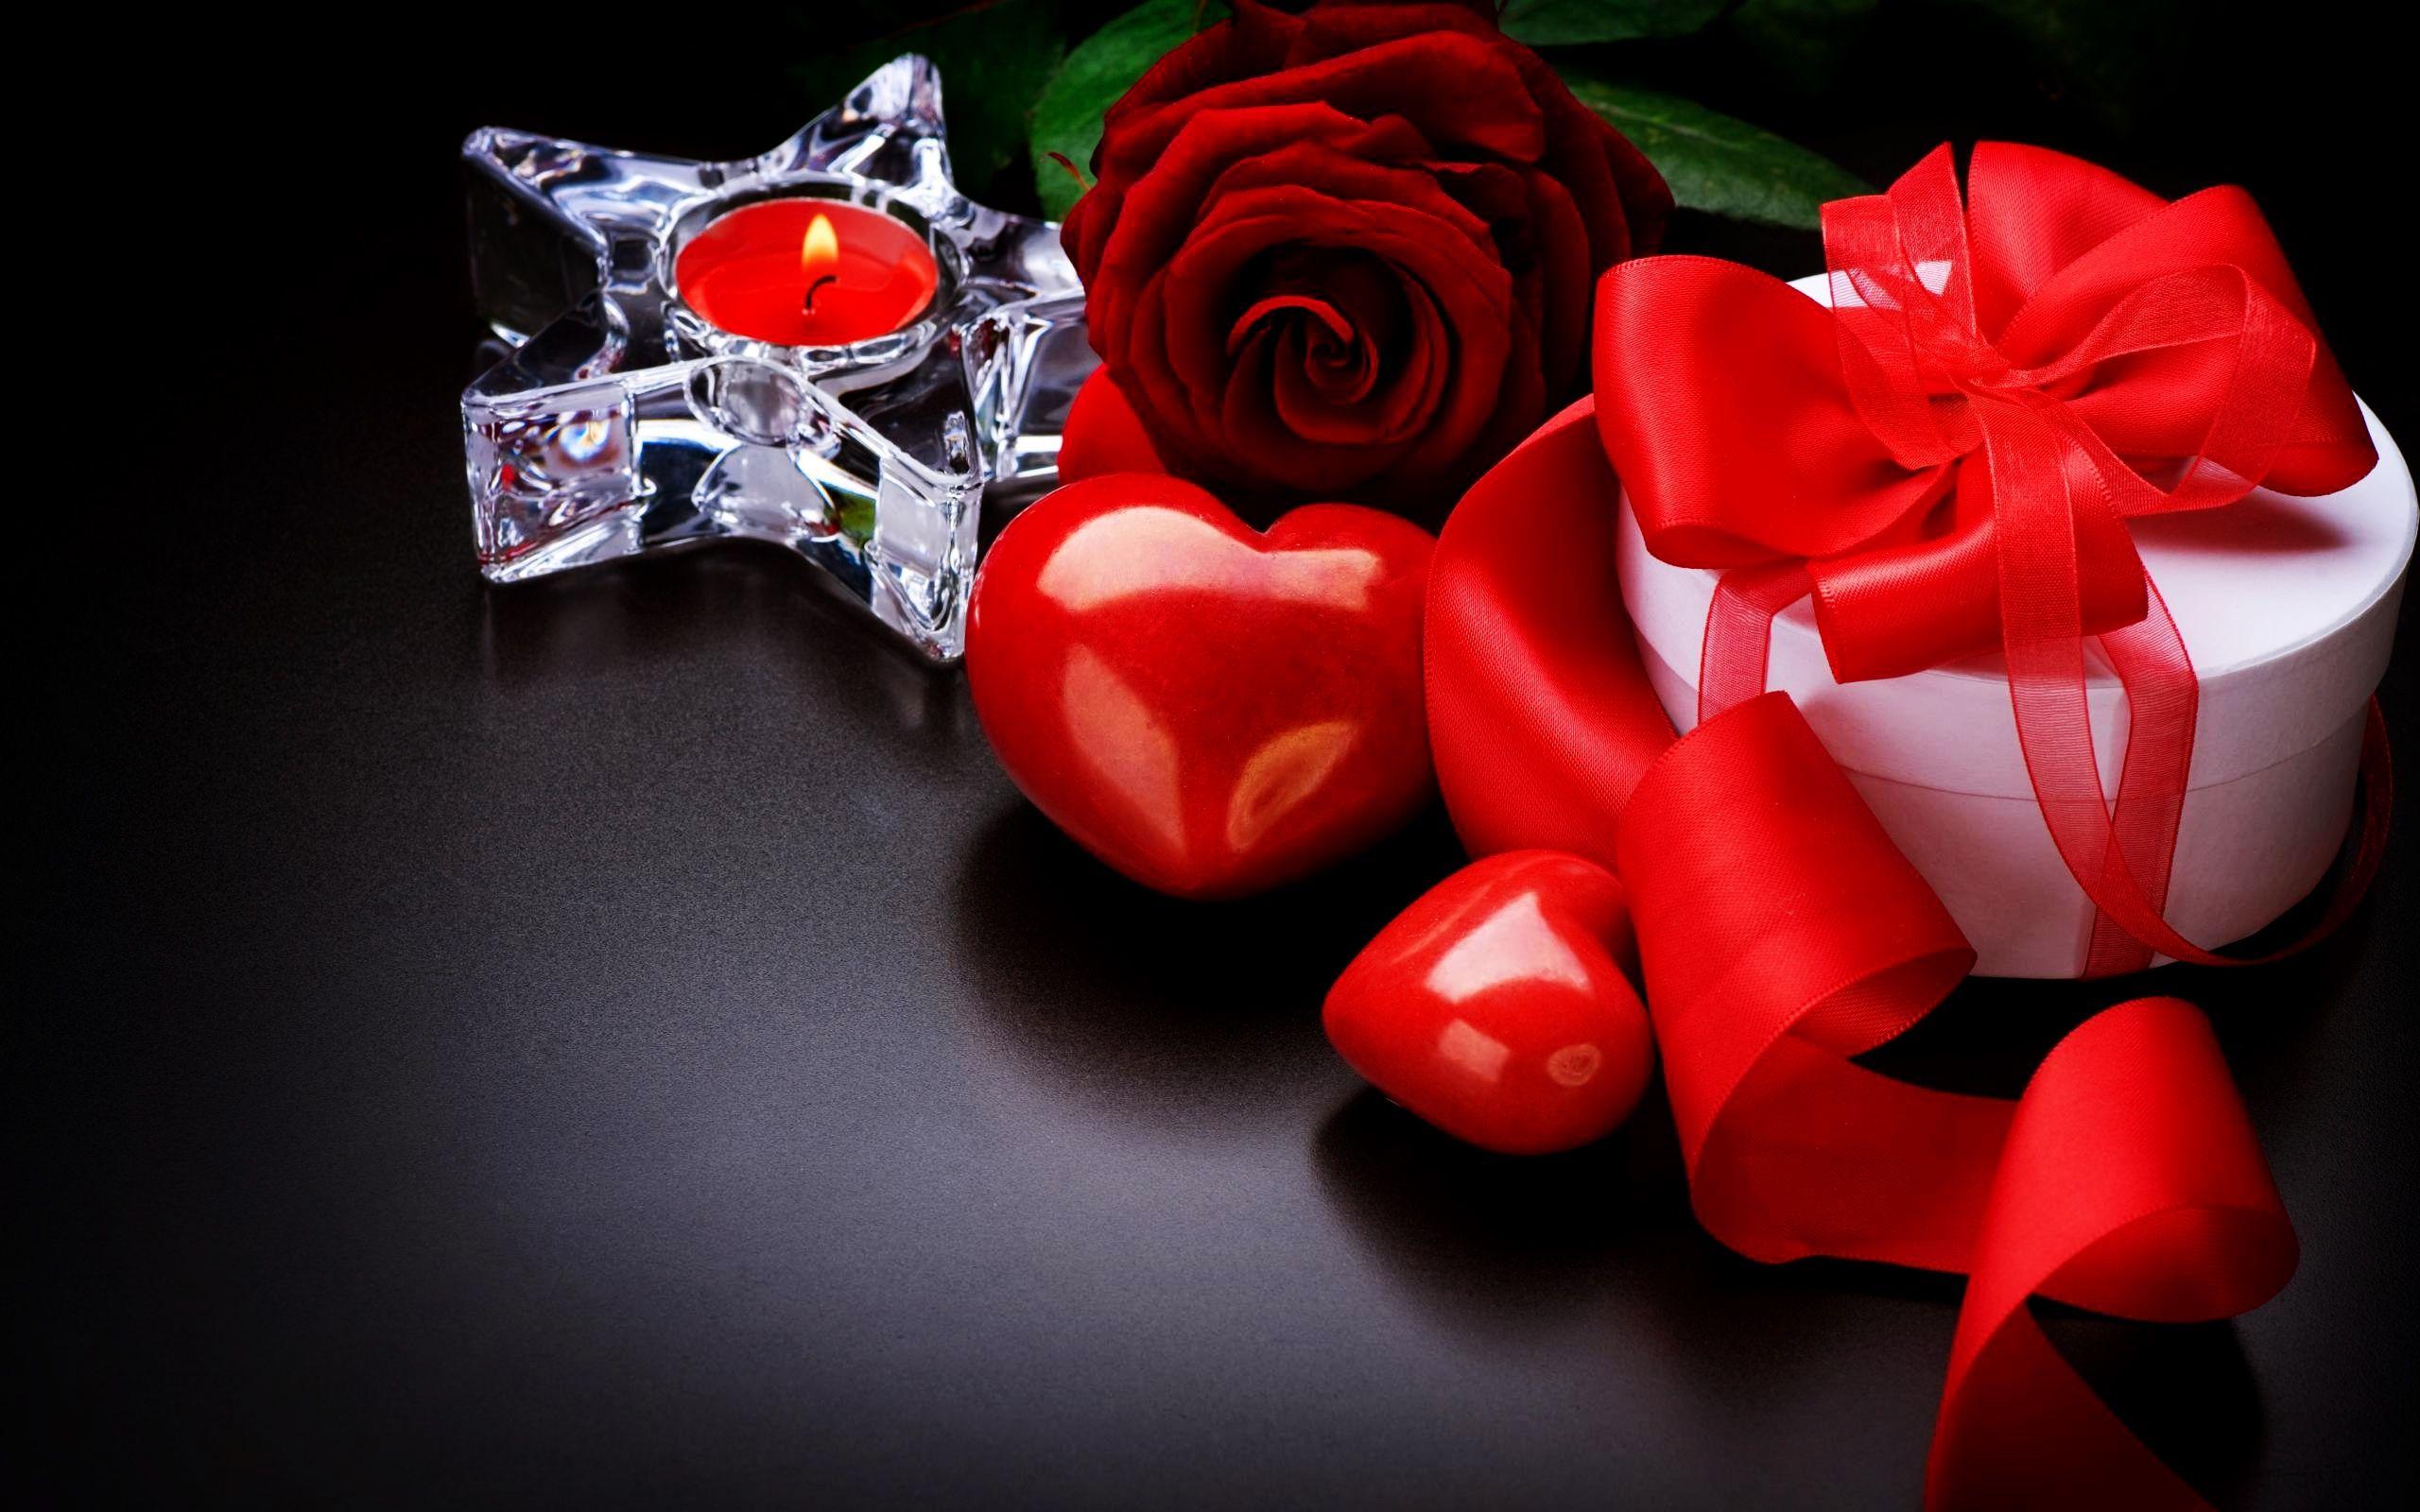 Happy Valentines Day 2019 Image Free Download